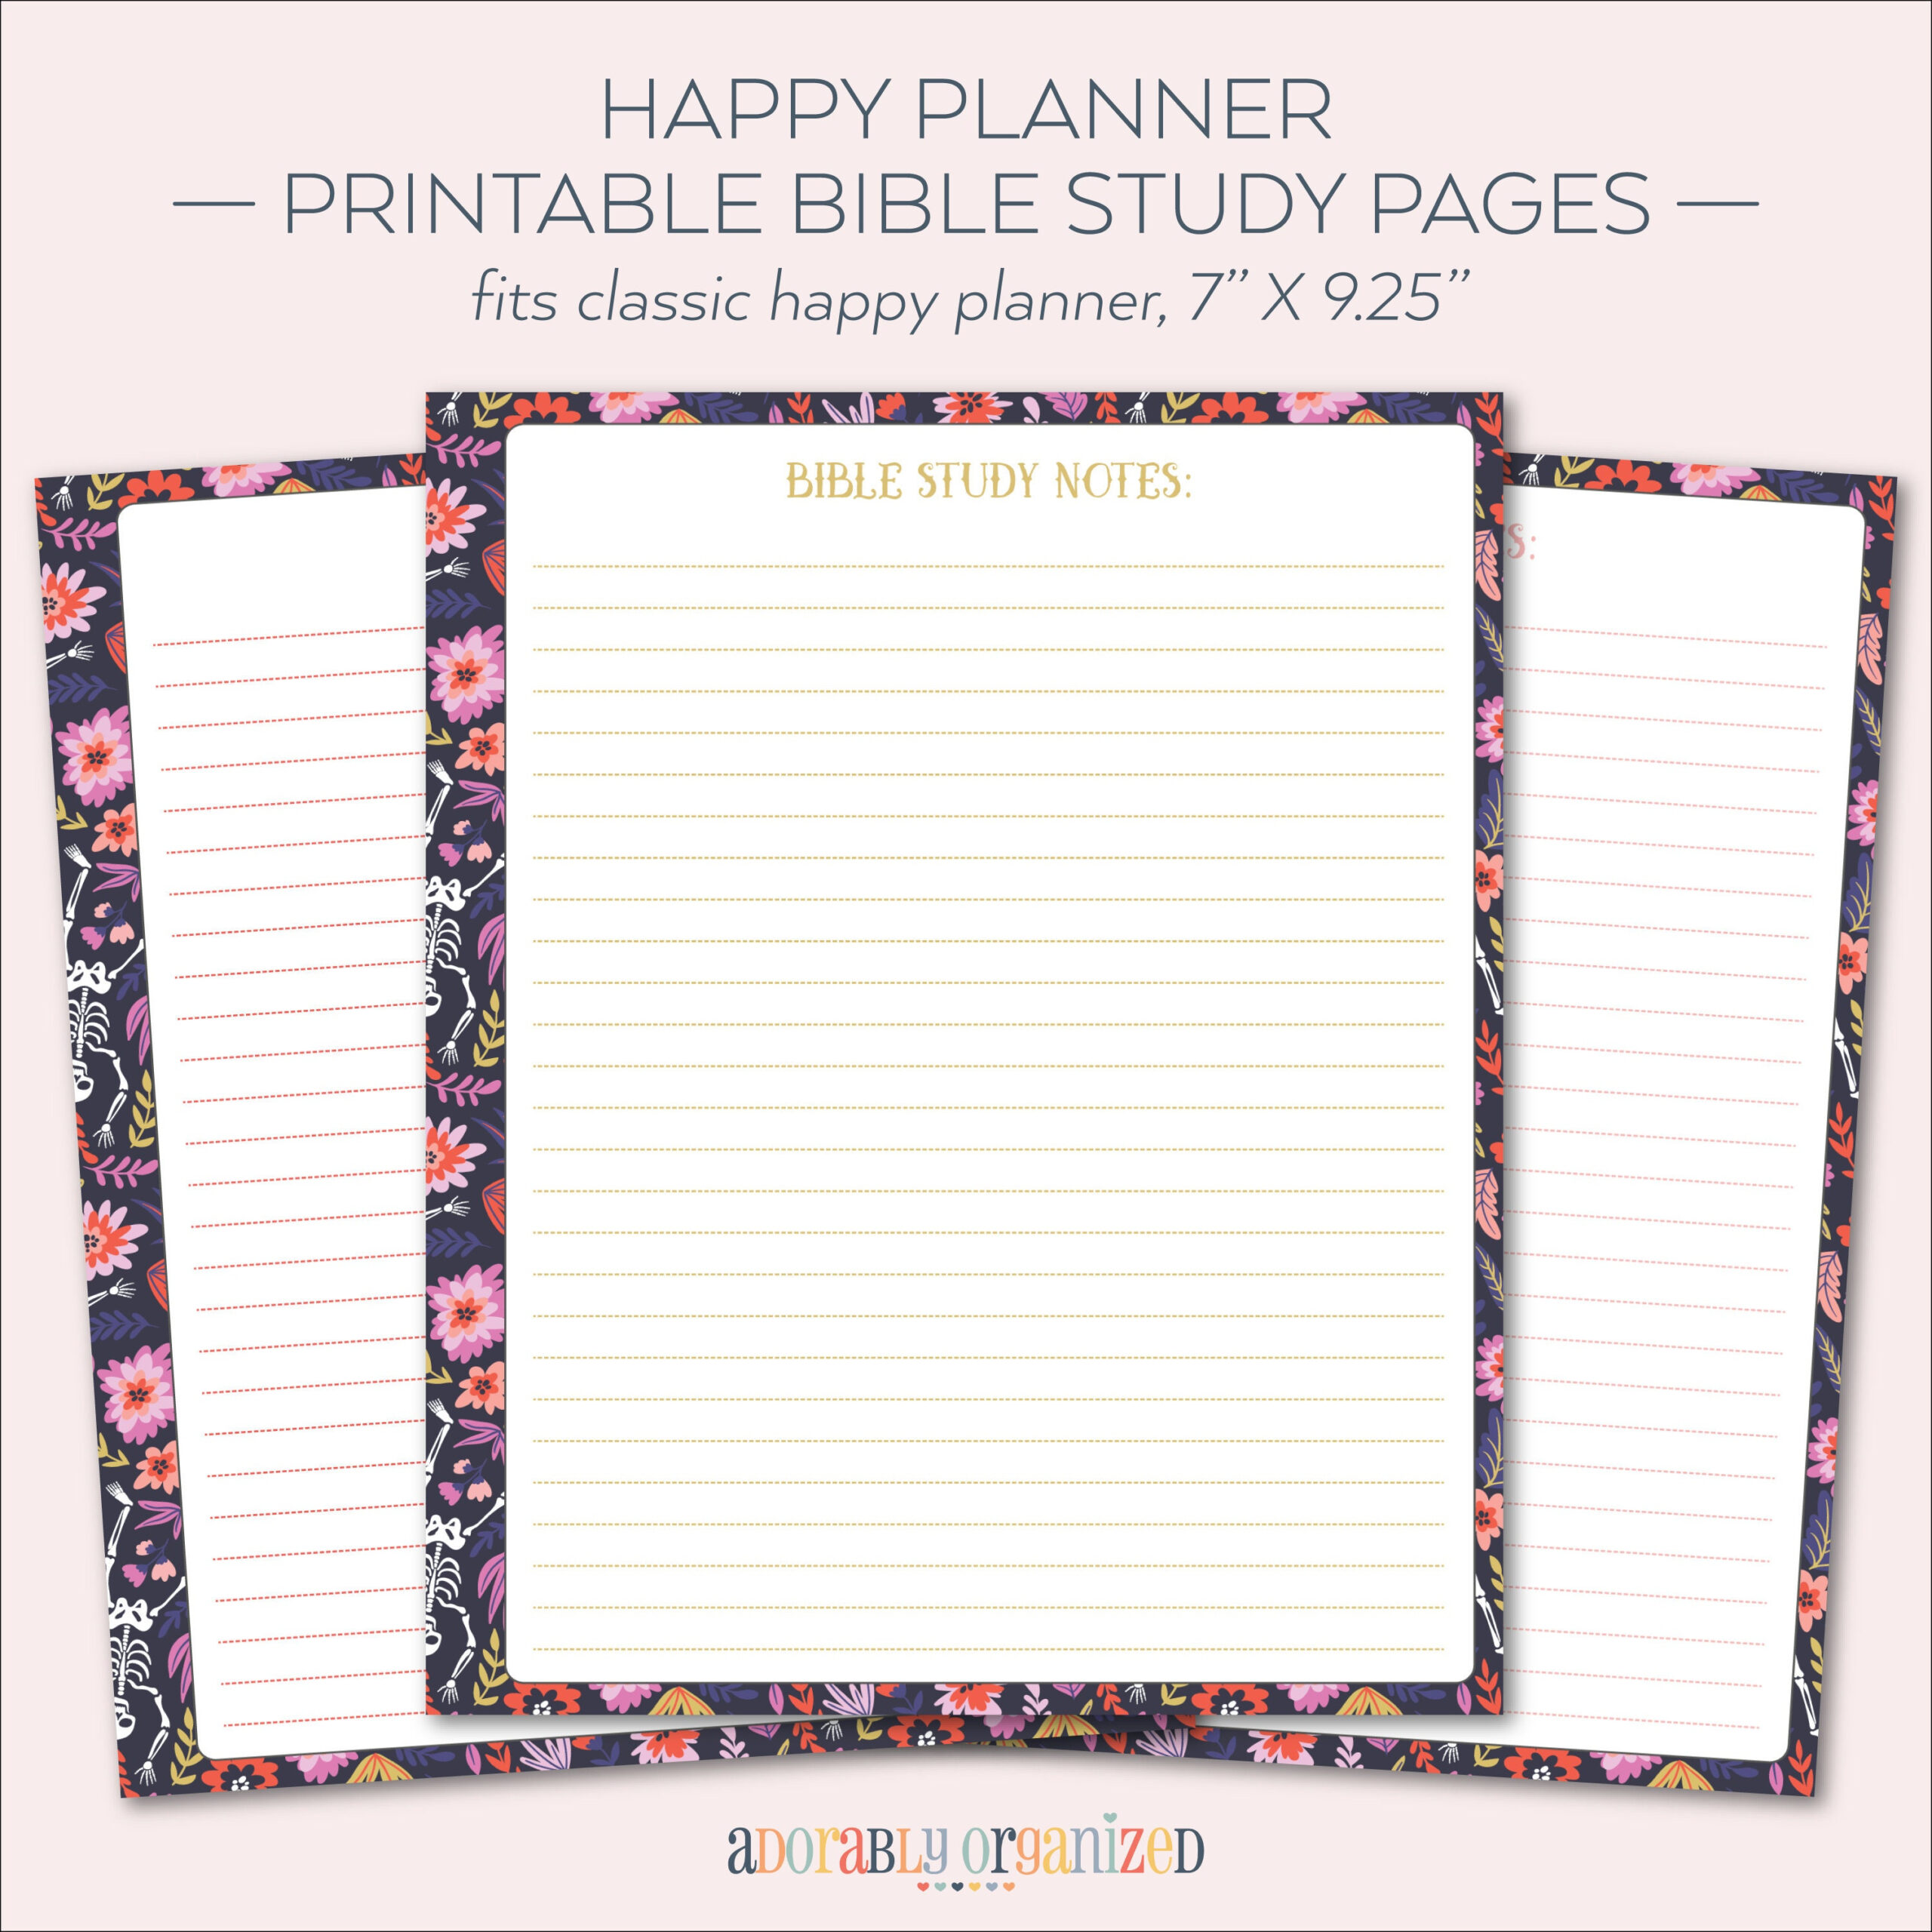 HAPPY PLANNER PRINTABLE Bible Study Pages Inserts 7 X 9 25 Etsy